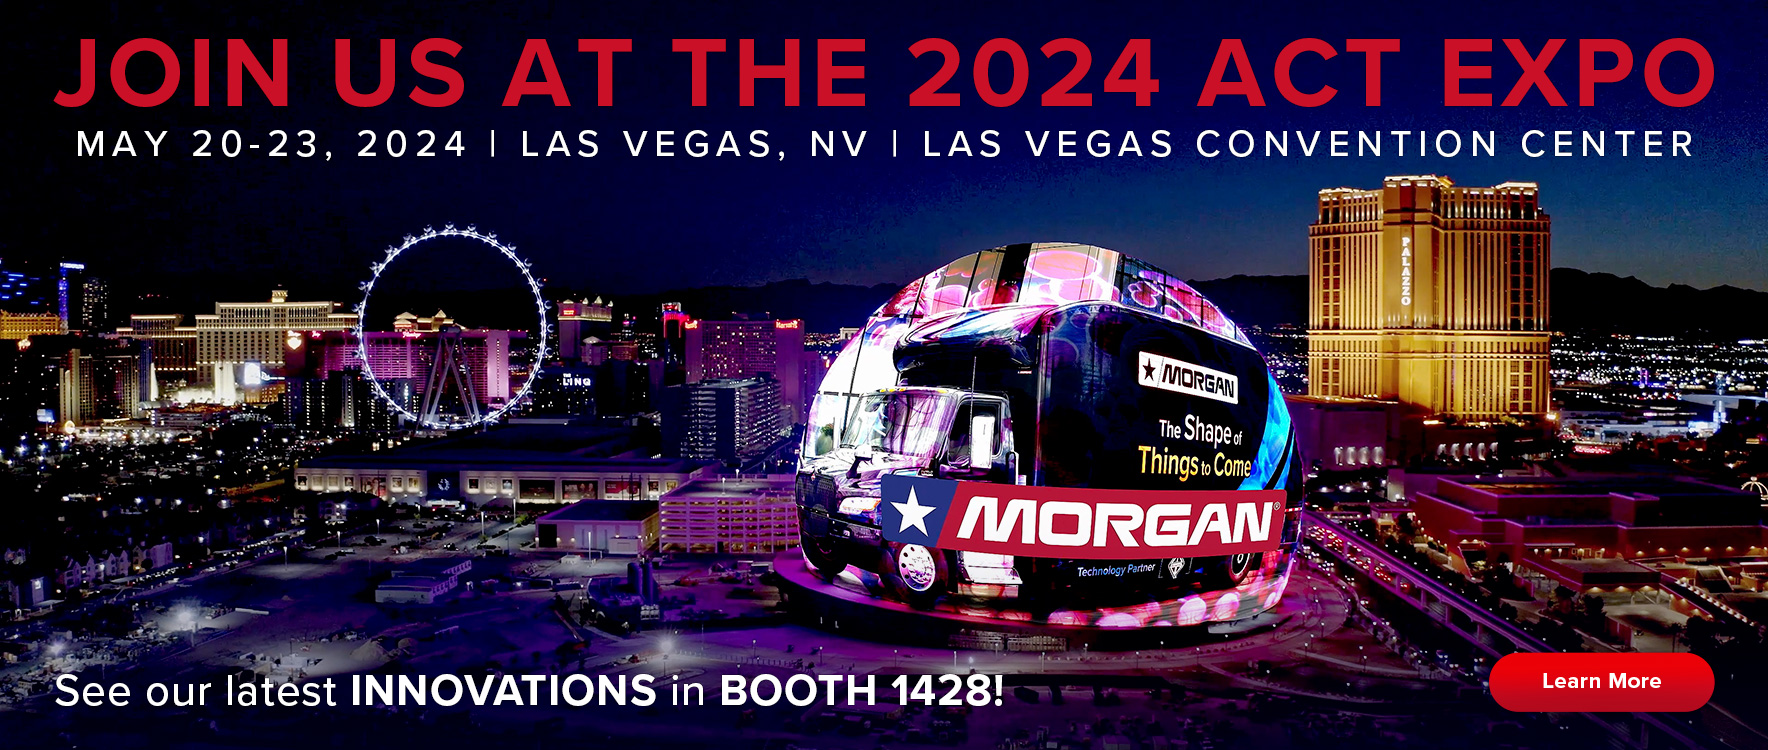 See our latest innovations at the 2024 ACT Expo